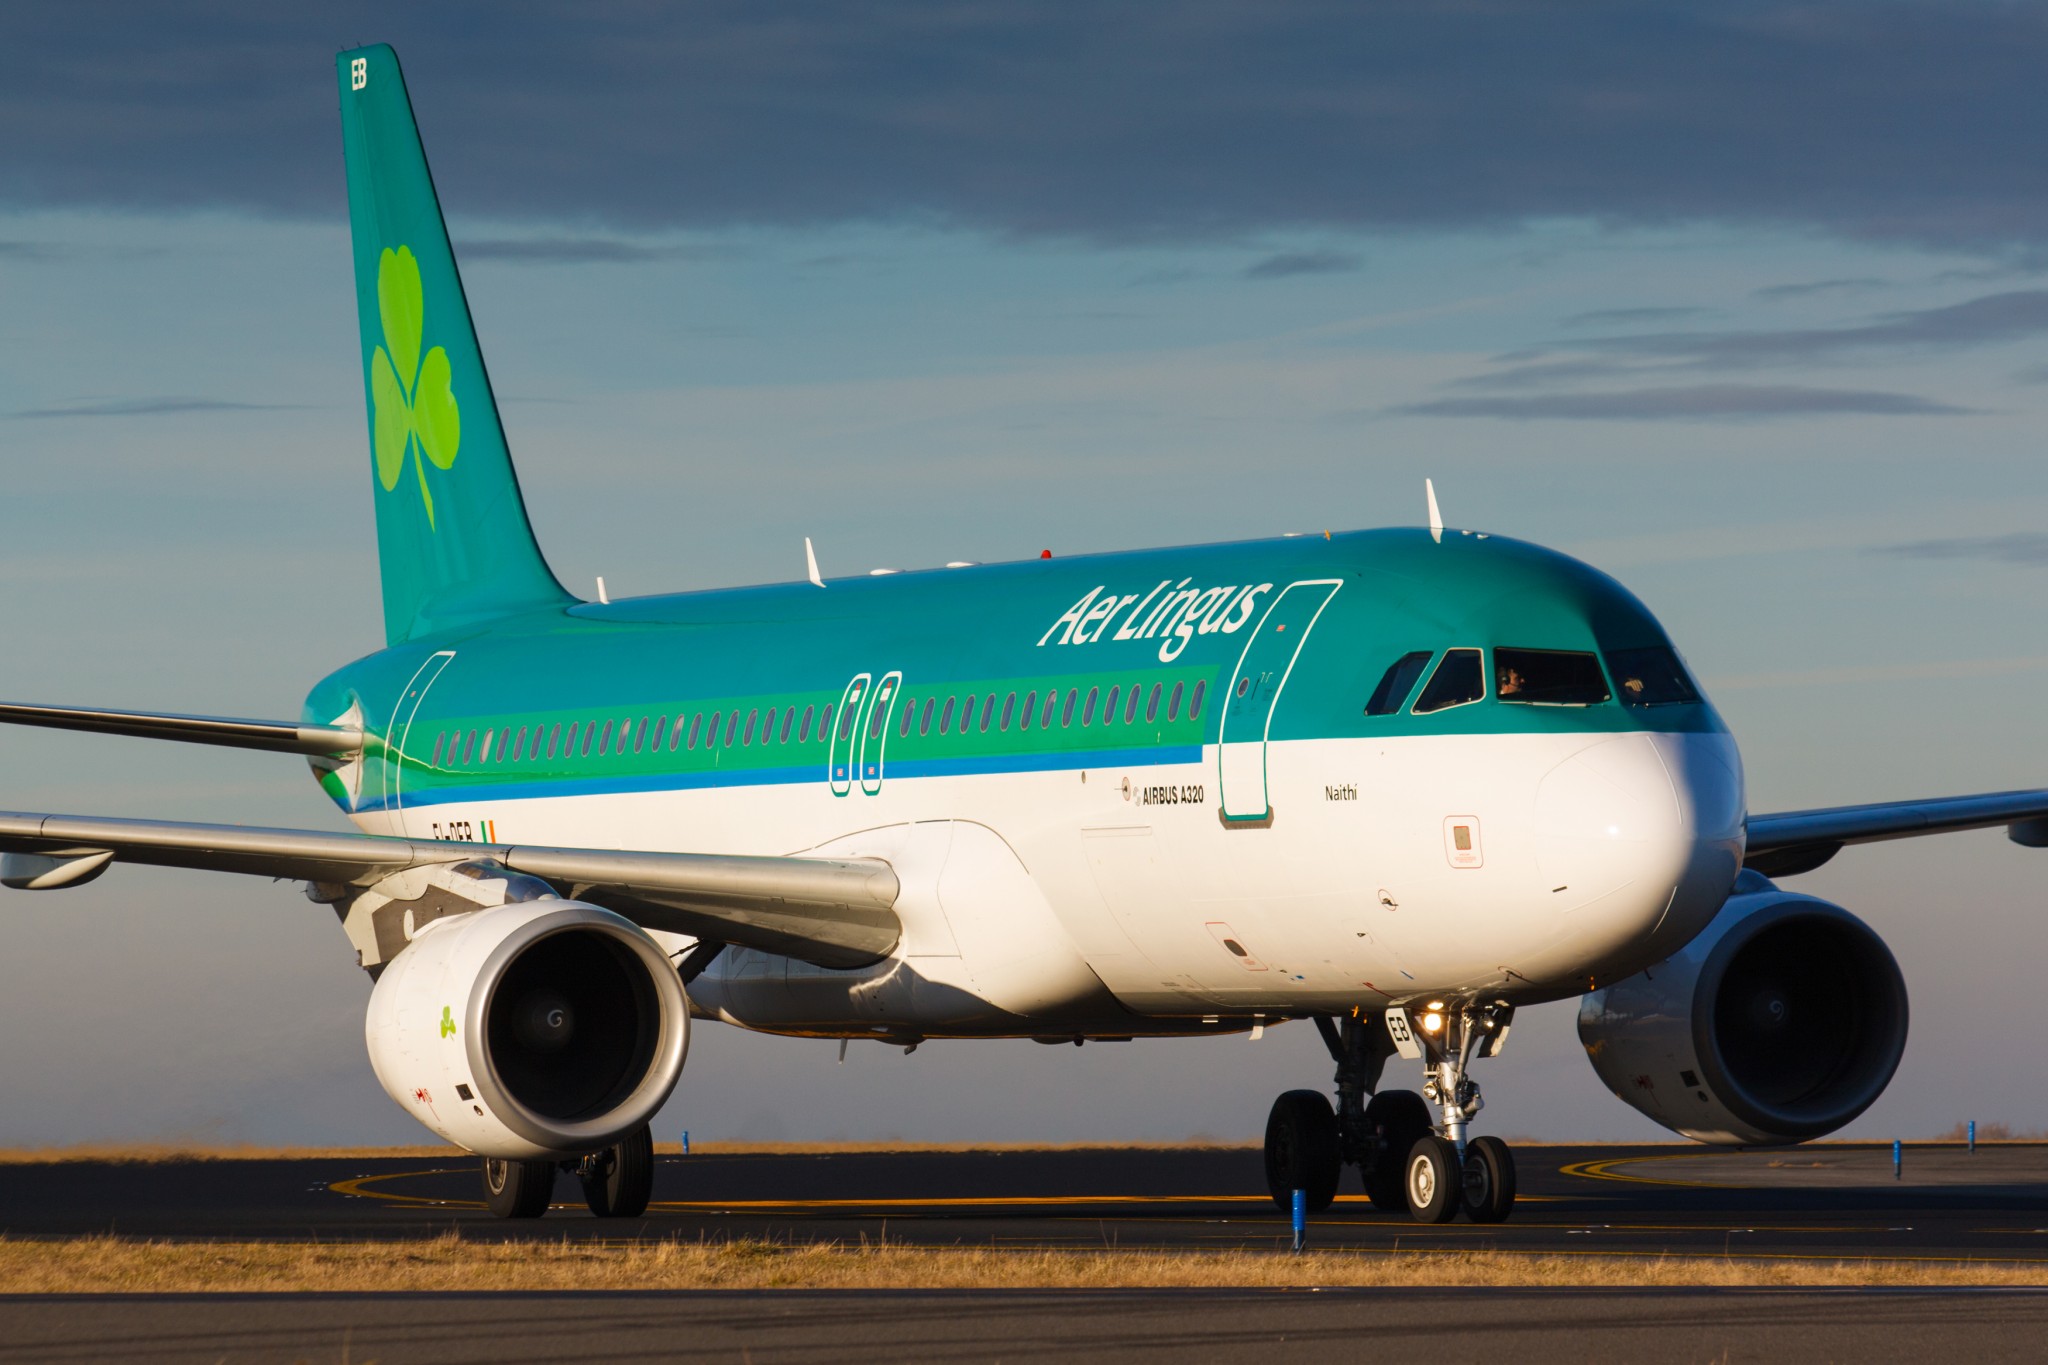 Aer Lingus announces additional services for 2017